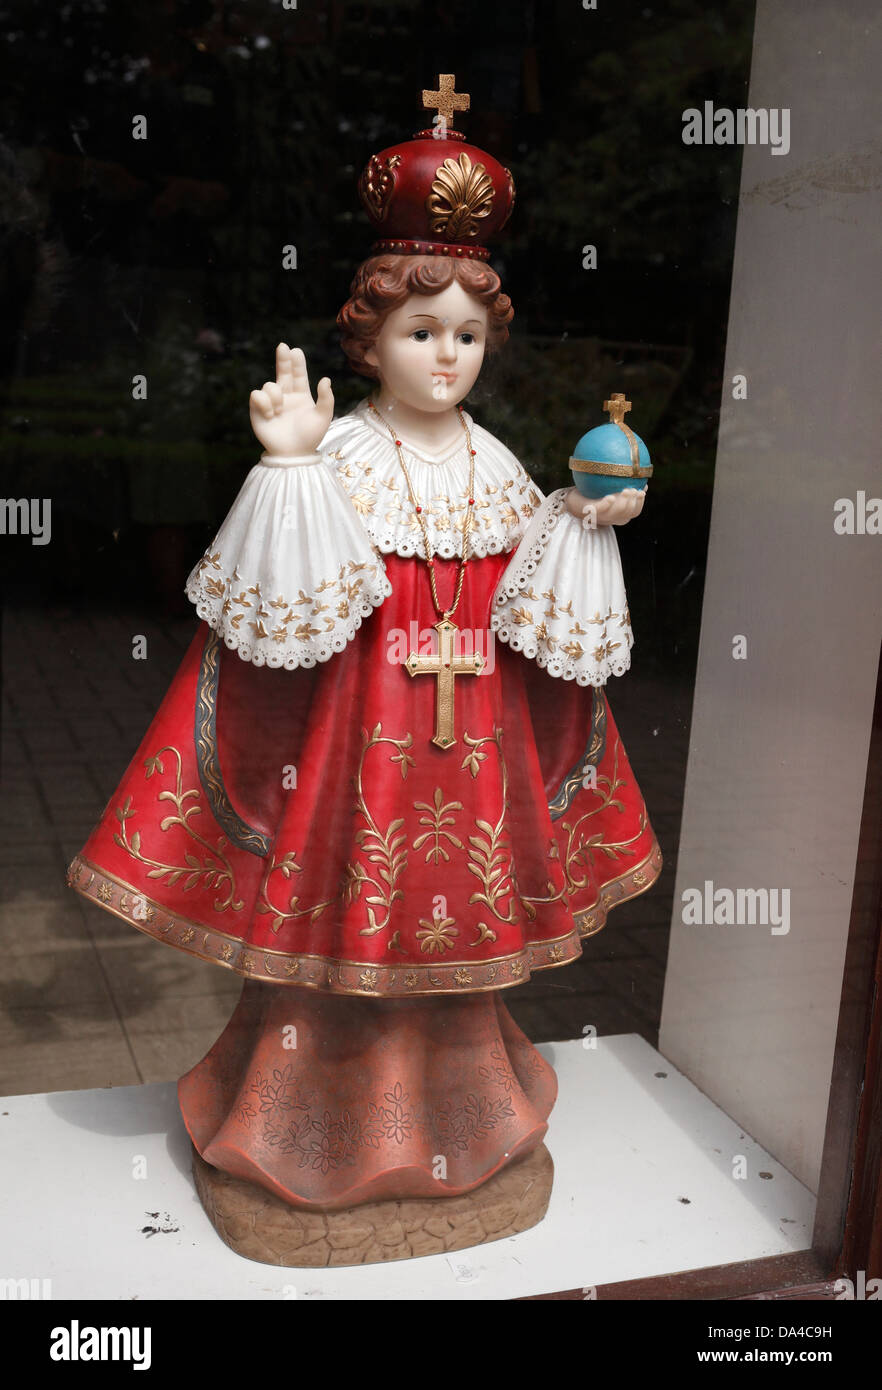 A religious statue on display at the Roman Catholic National Shrine of our Lady. Stock Photo